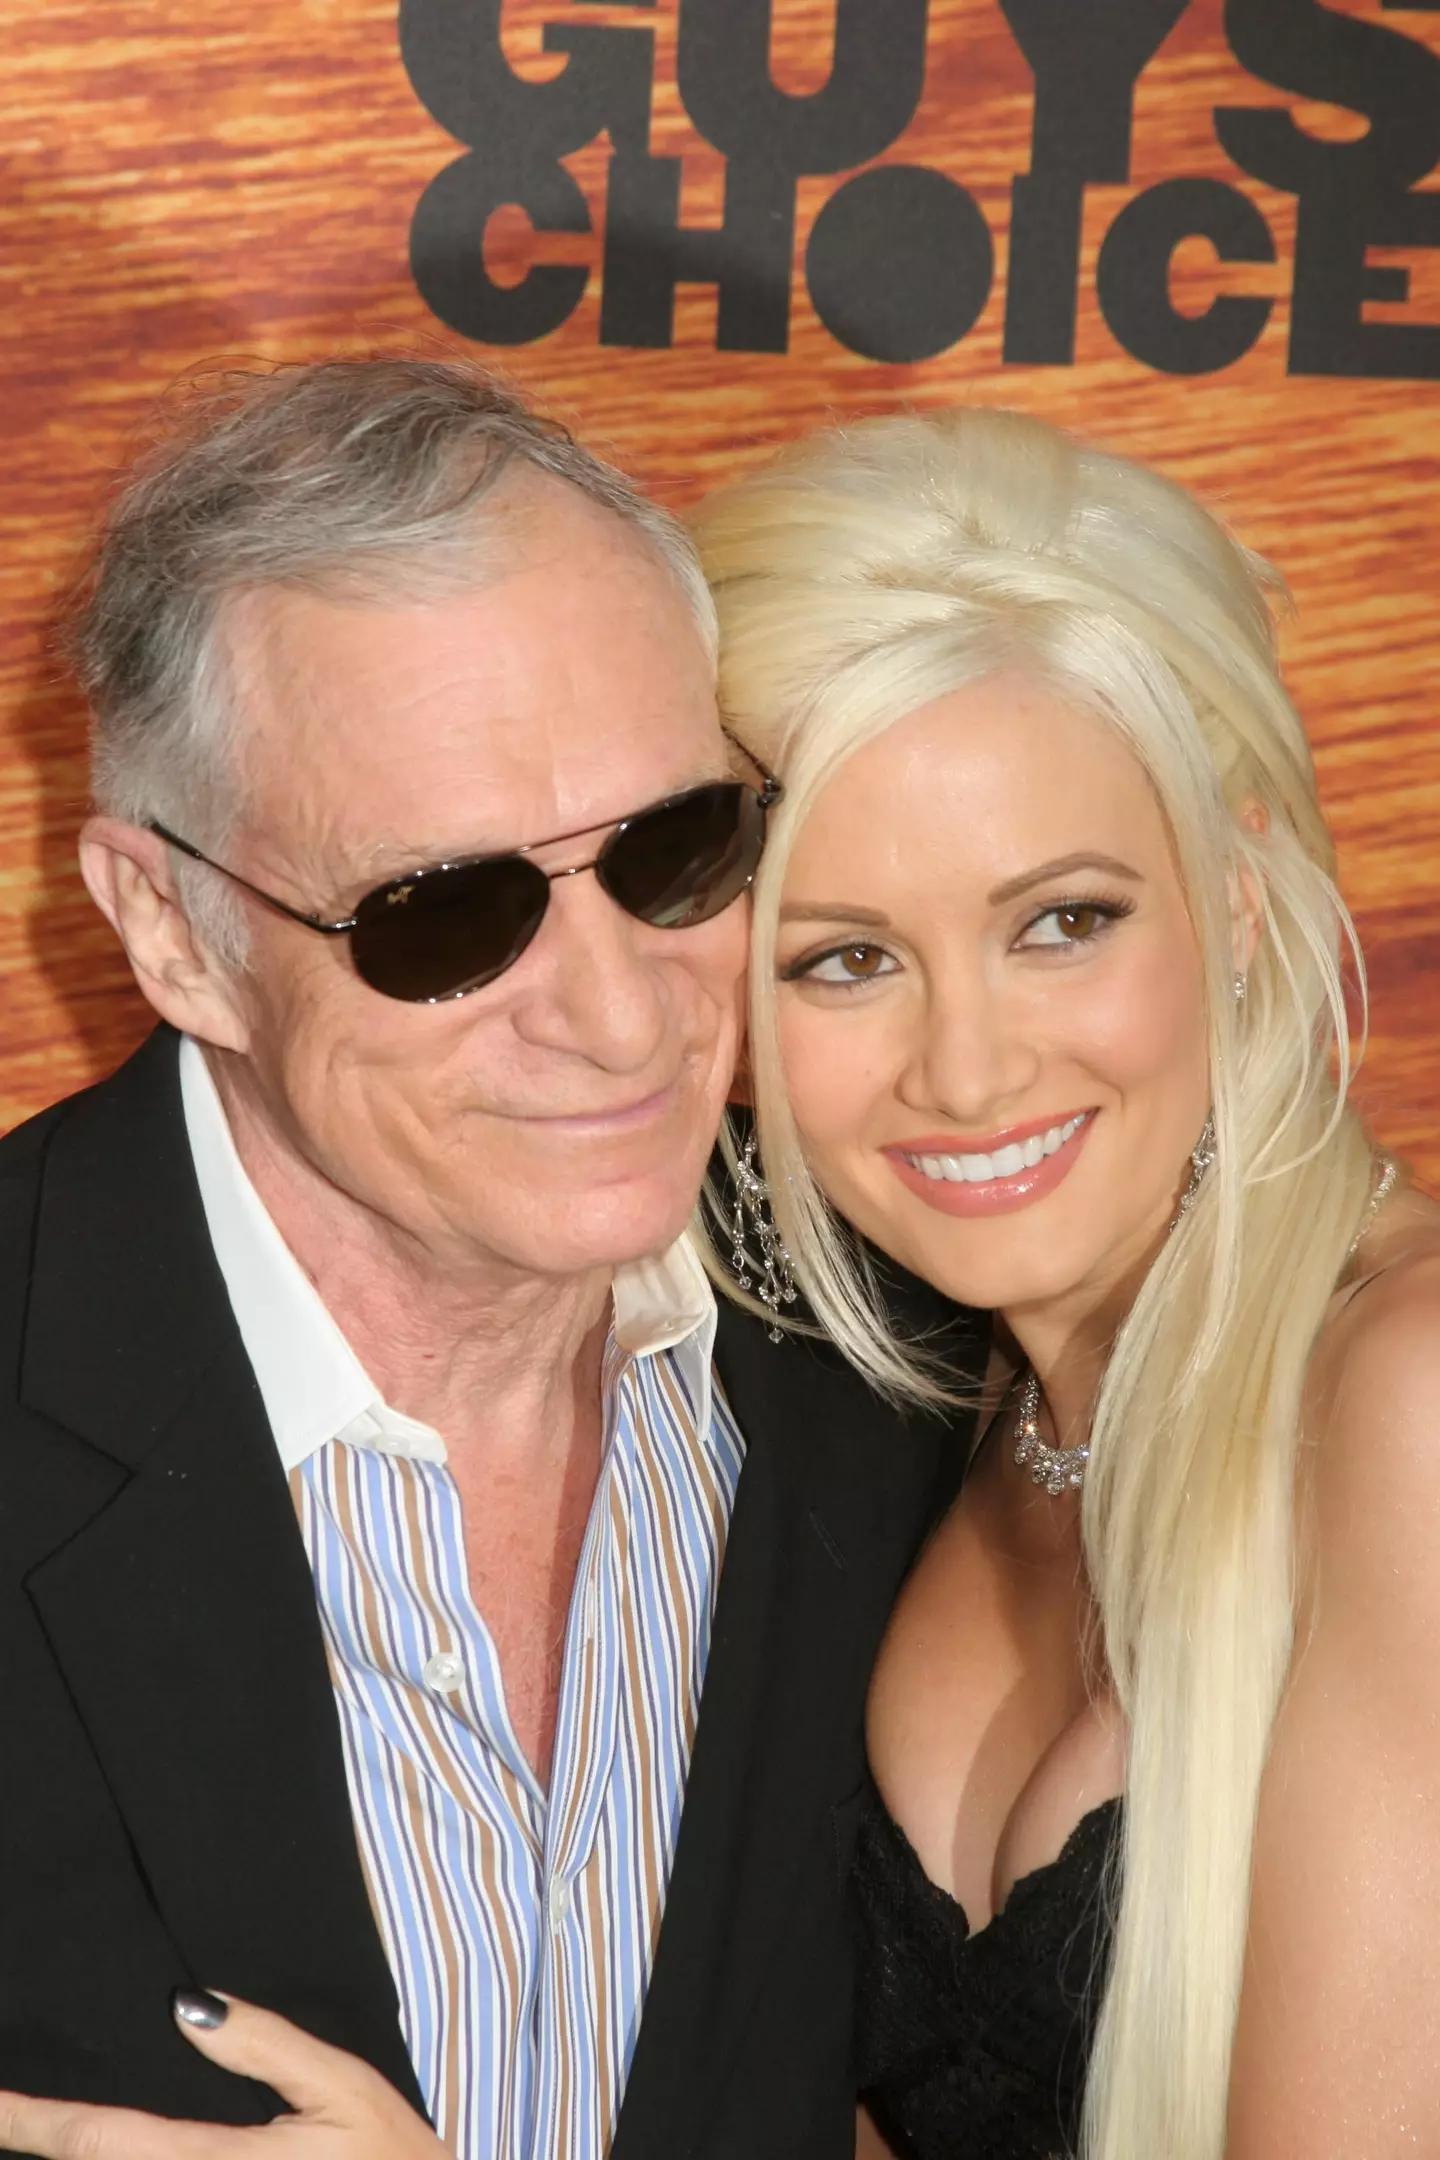 Holly Madison and Hugh Hefner called it quits in 2008.